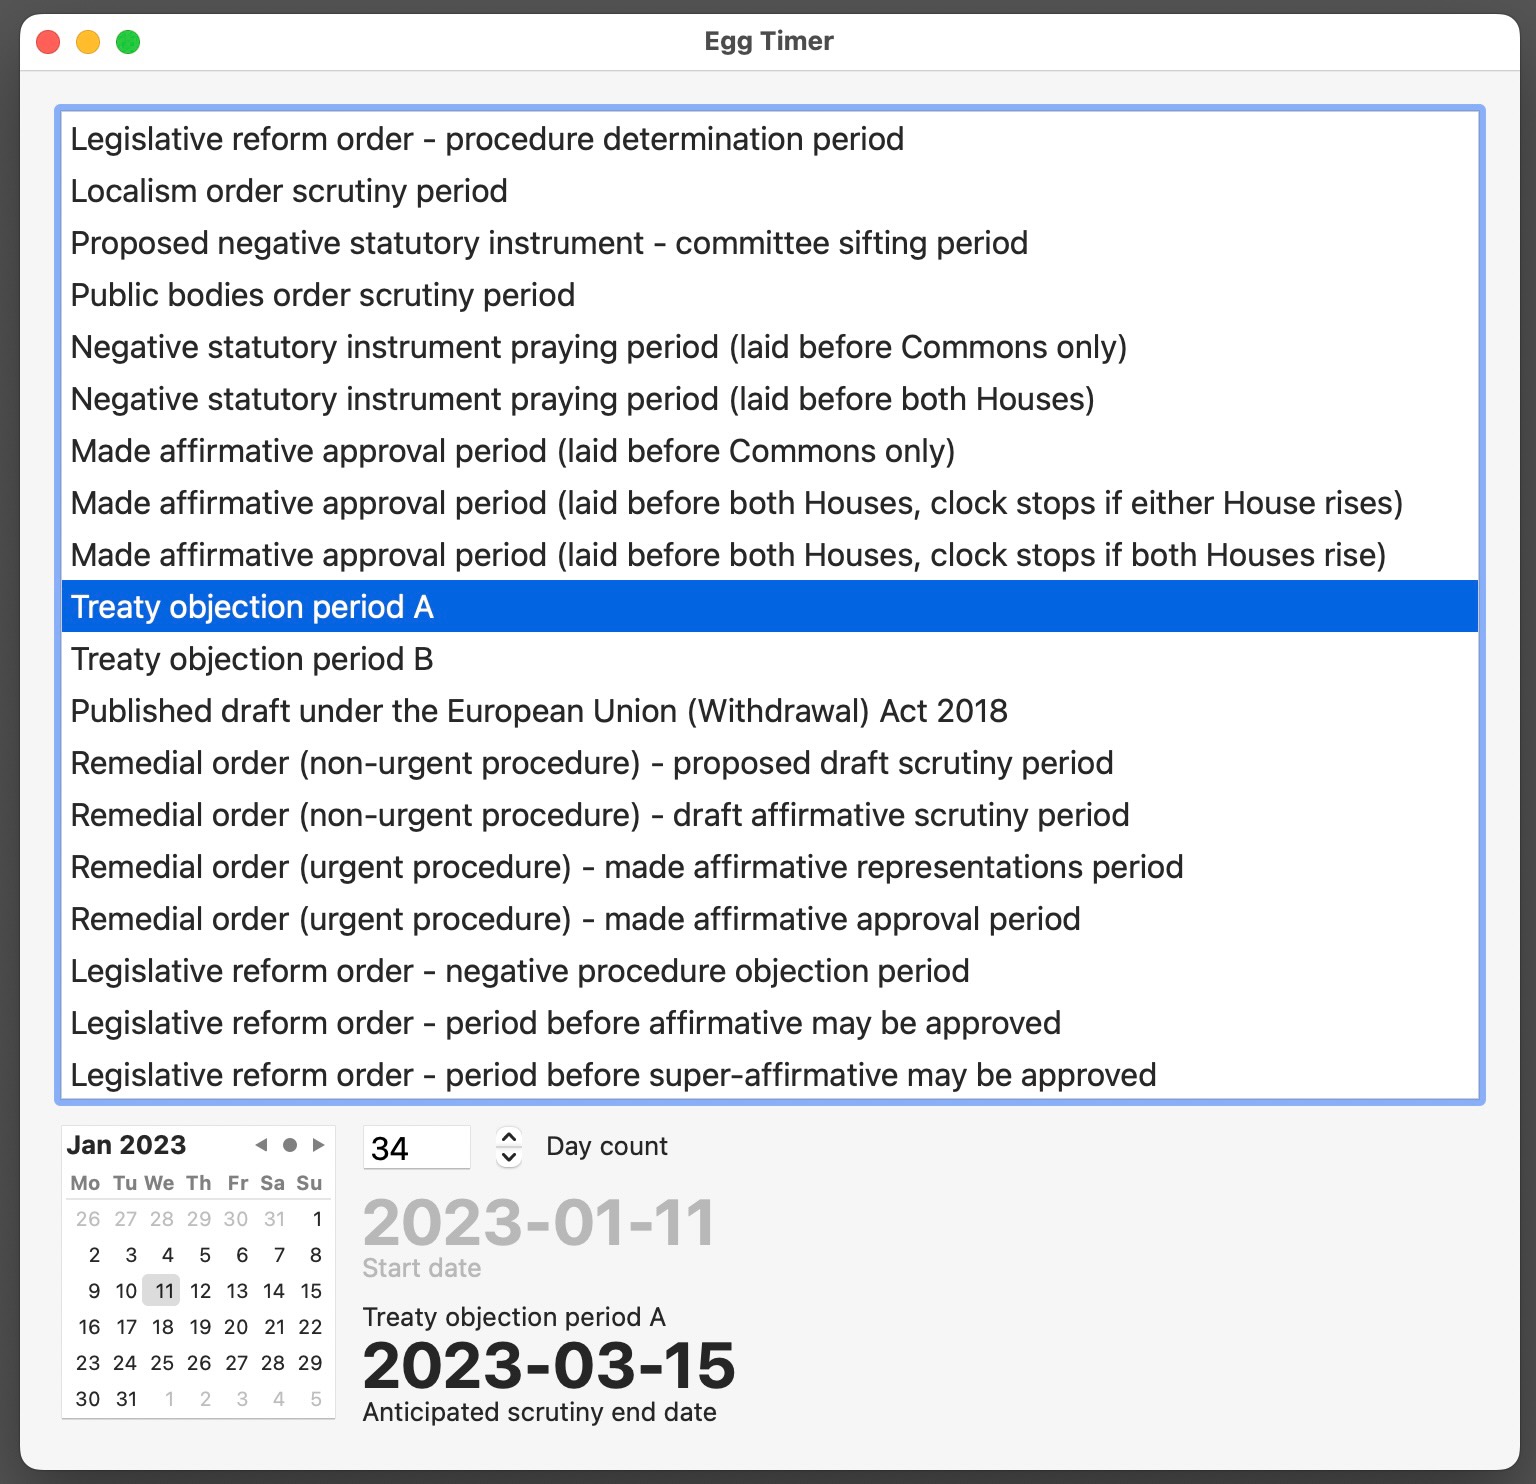 A screenshot of the Egg Timer Mac app showing a scrutiny date calculation for treaties